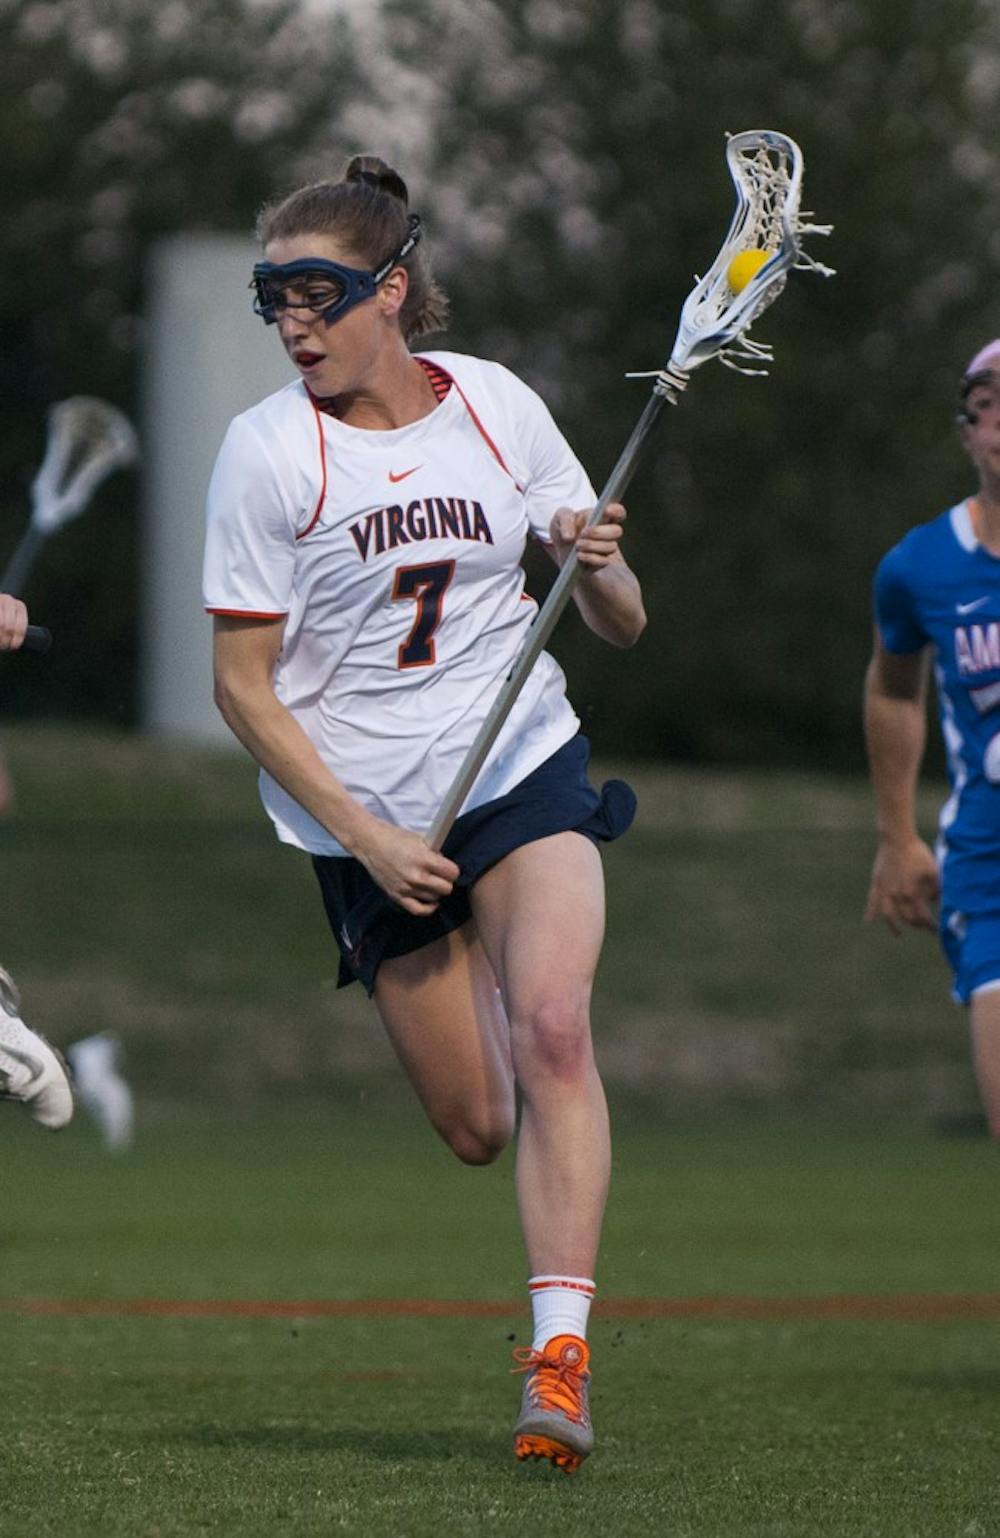 <p>Senior attacker Courtney Swan earned IWLCA Second Team All-American honors last year. The Cavaliers boast a deep core of veterans including Swan and senior midfielder Morgan Stephens. </p>